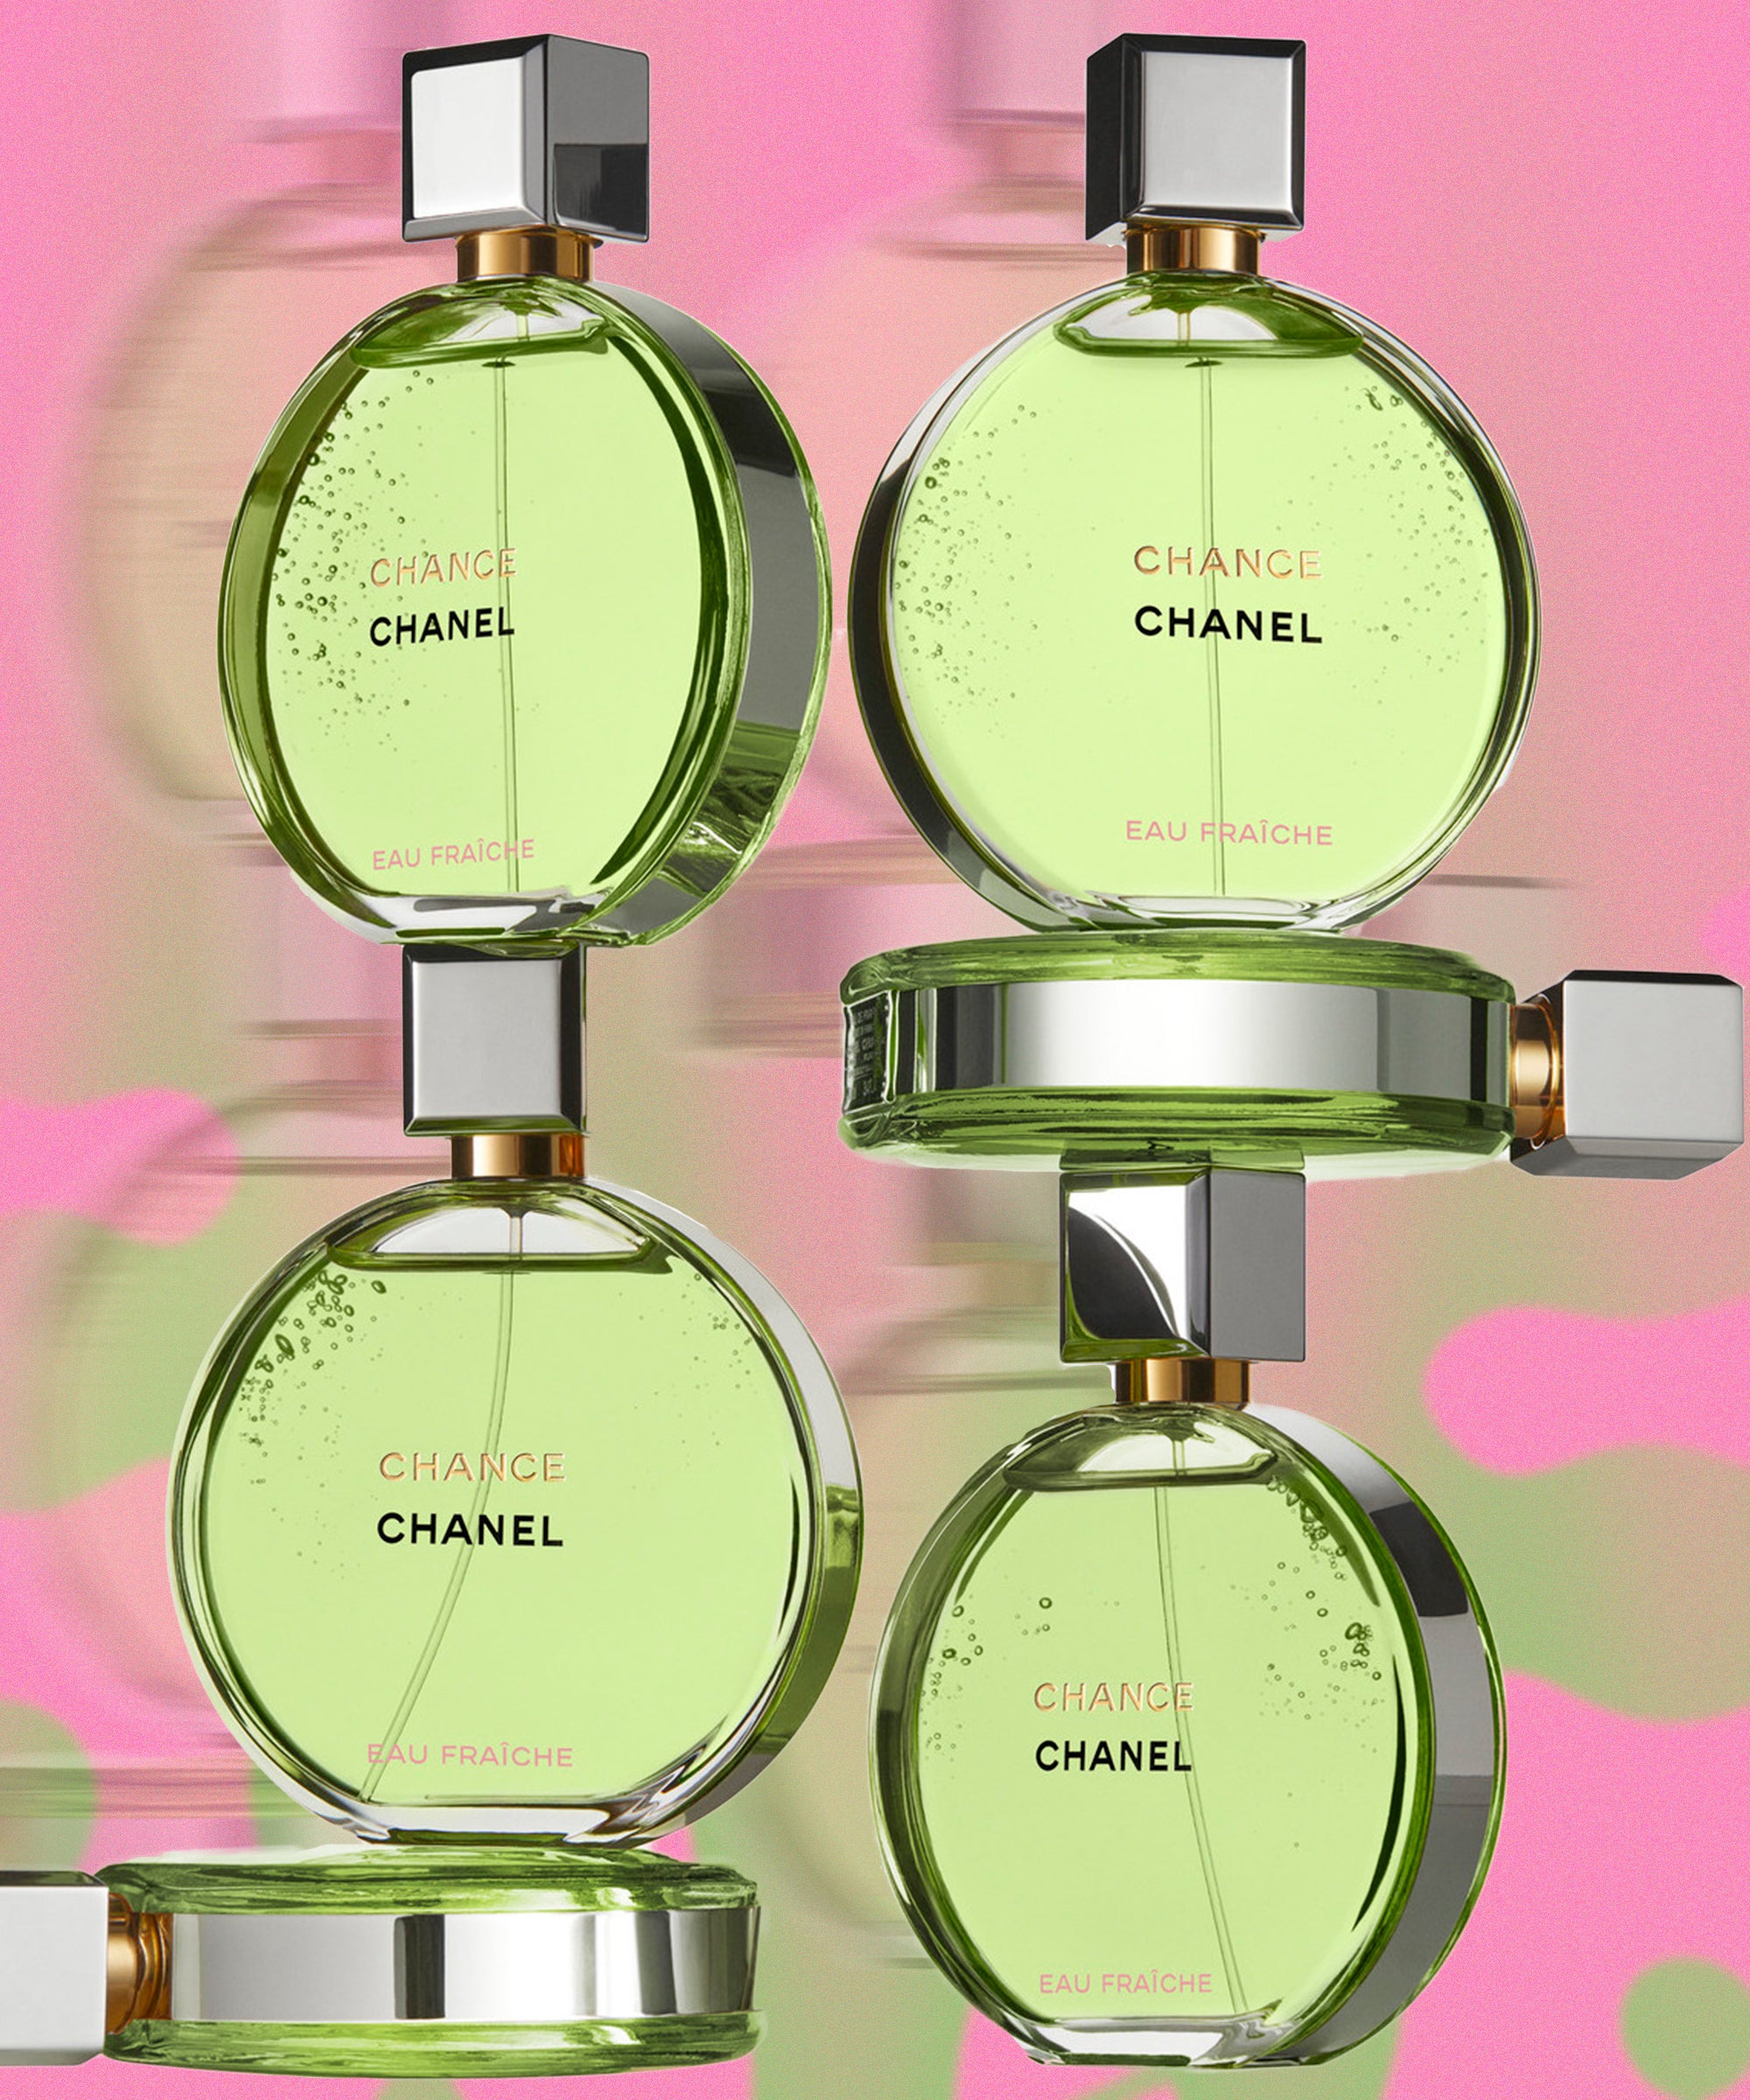 Chanel Launches the Most Expensive Perfume in the World